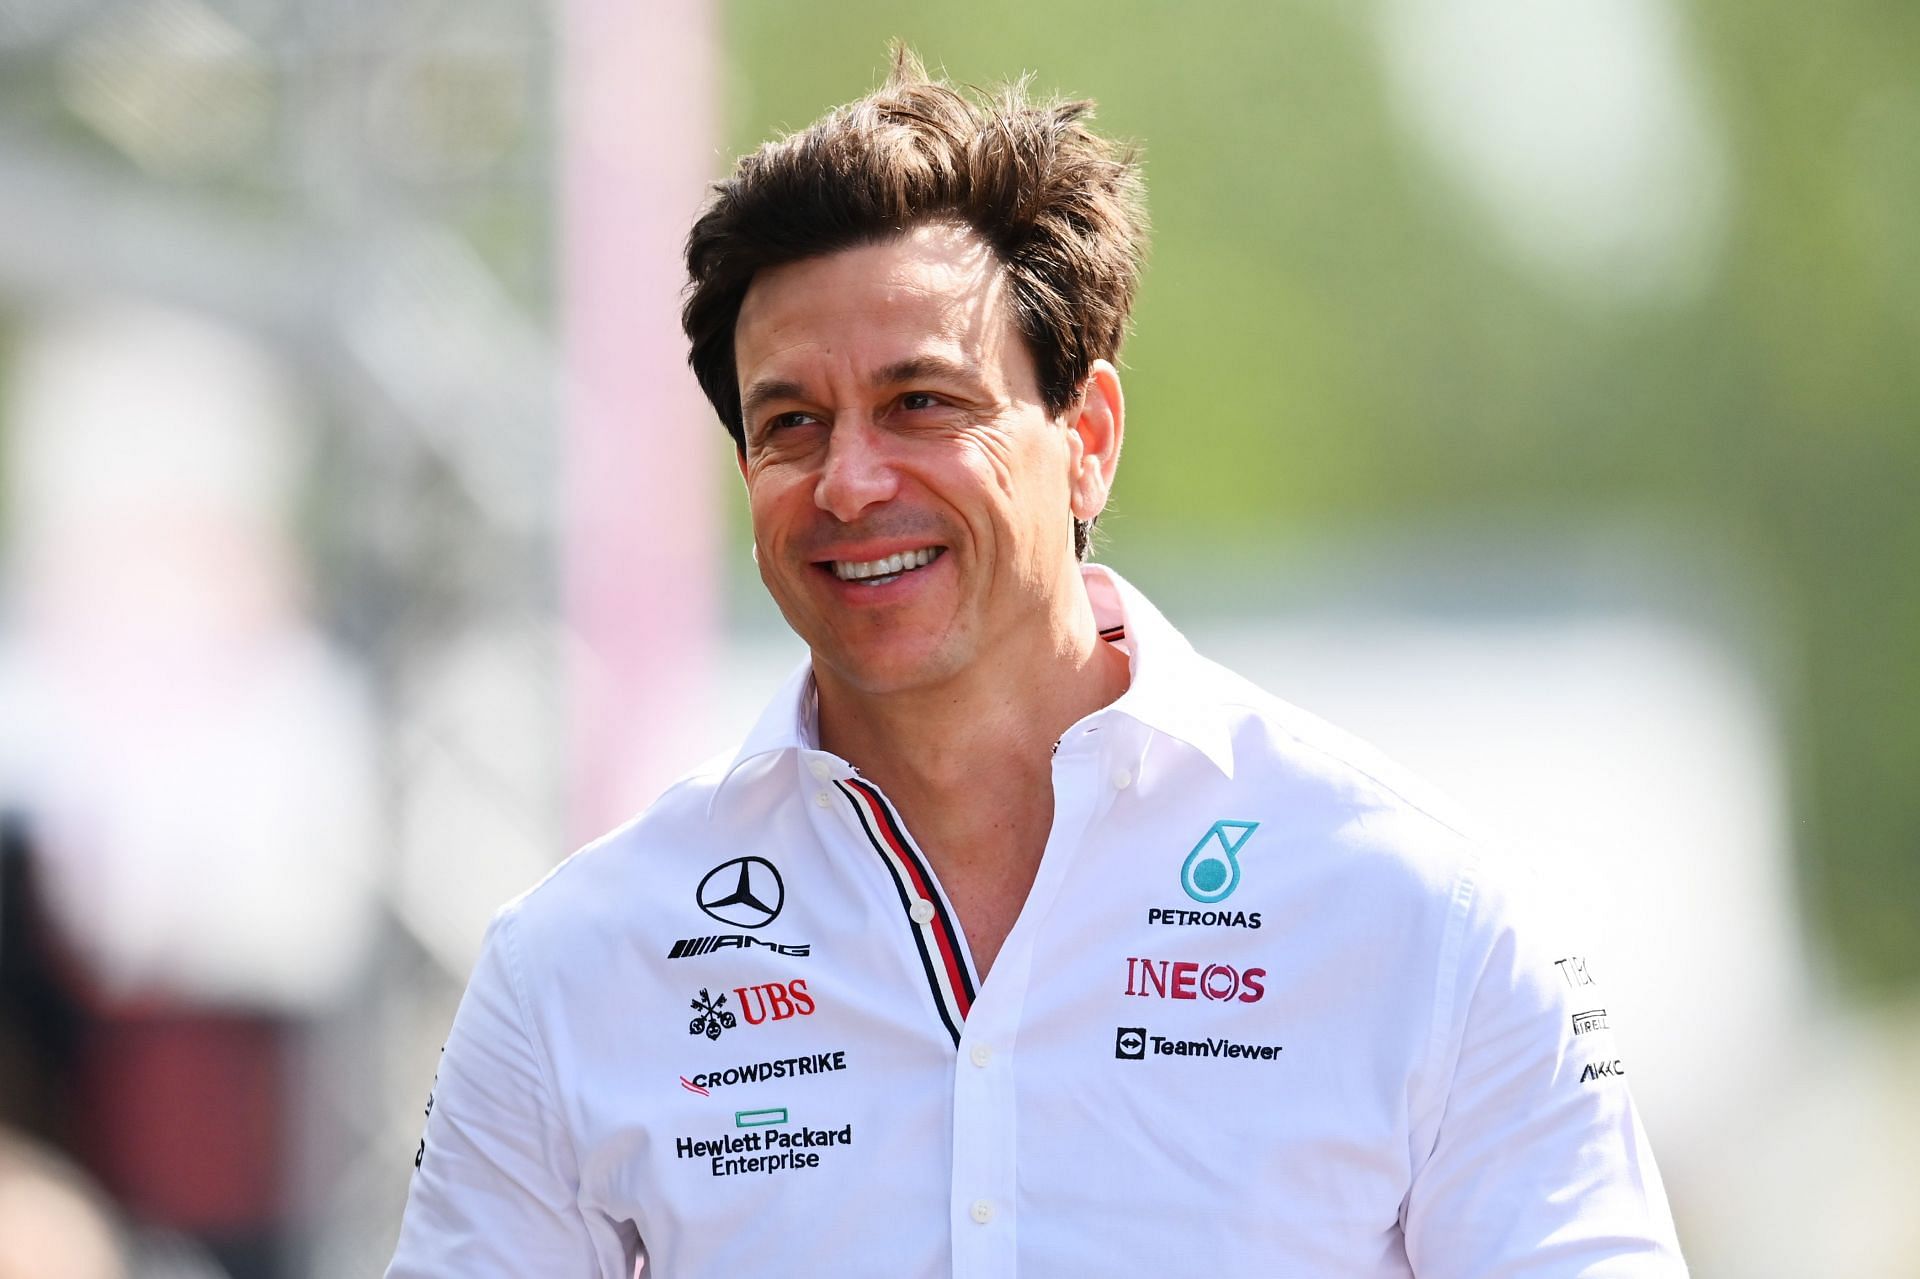 Mercedes GP executive director Toto Wolff in the Paddock before practice ahead of the F1 Grand Prix of Emilia Romagna (Photo by Dan Mullan/Getty Images)